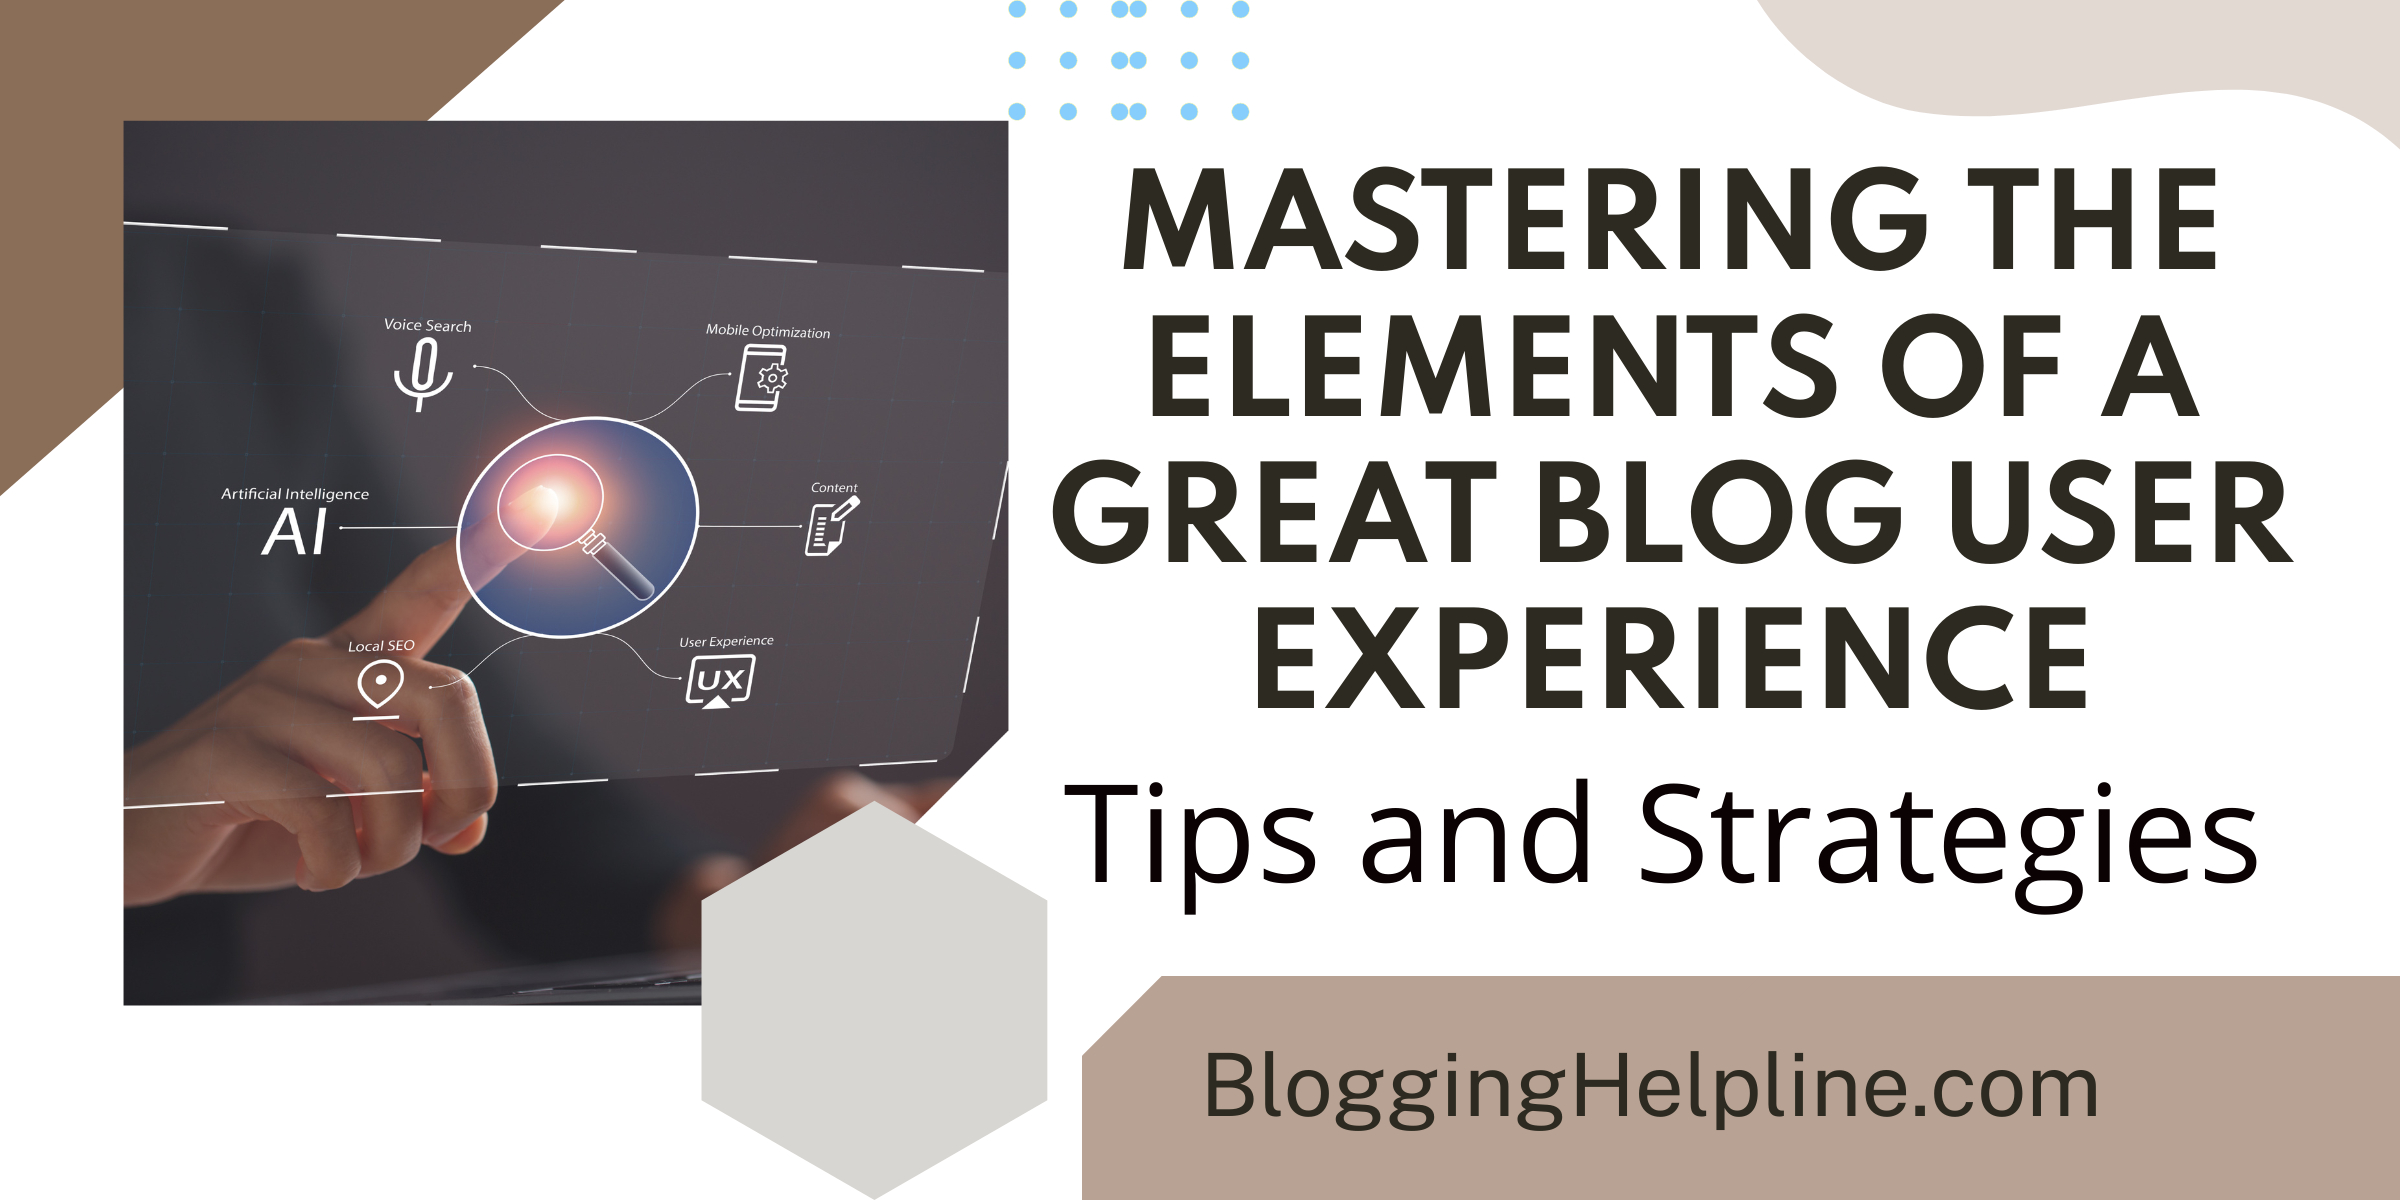 Mastering the Elements of a Great Blog User Experience Tips and Strategies